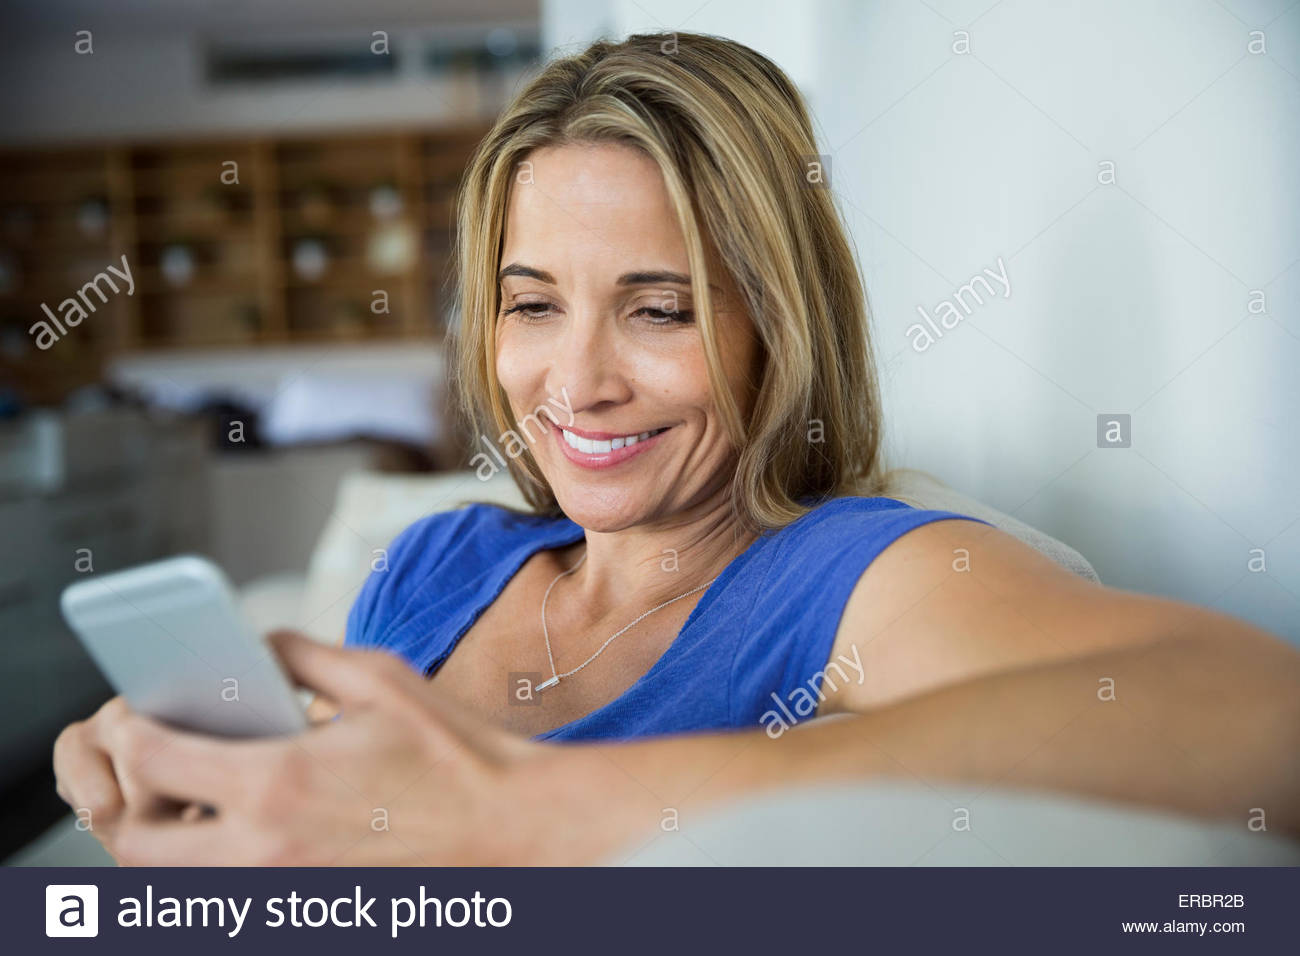 Smiling blonde woman texting with cell phone Banque D'Images